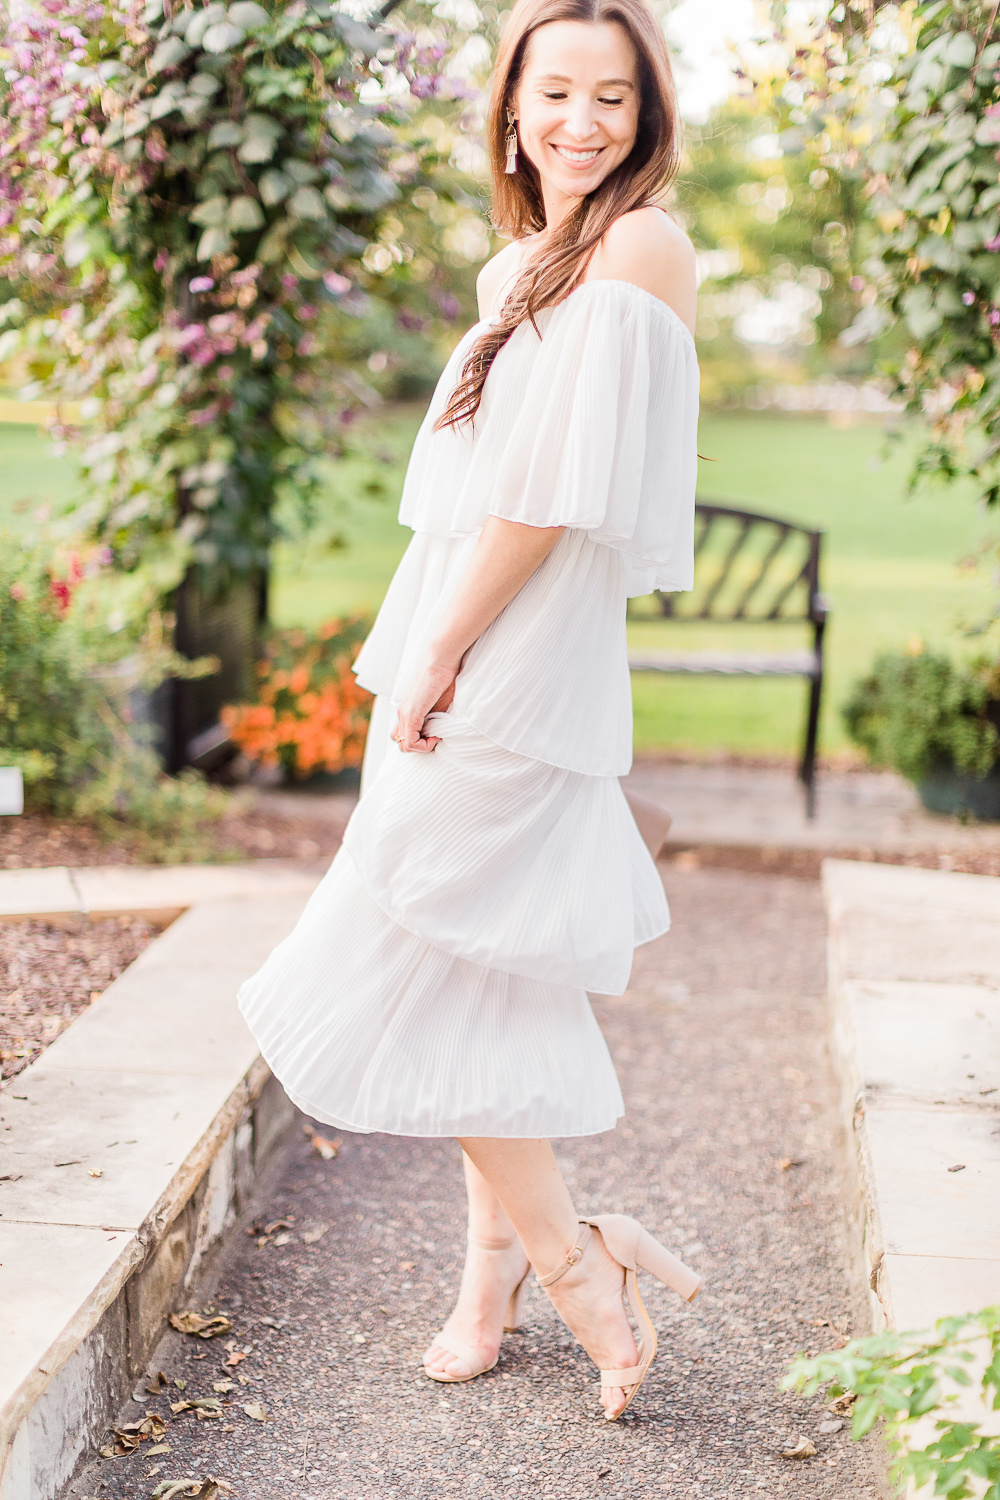 Budget-Friendly Bridal Shower Dress for the Bride-to-Be by affordable fashion blogger Stephanie Ziajka on Diary of a Debutante, Amazon ETCYY Off the Shoulder Ruffle Chiffon Dress styled with Amazon Heels Charm nude chunky block sandals, fall LWD outfit